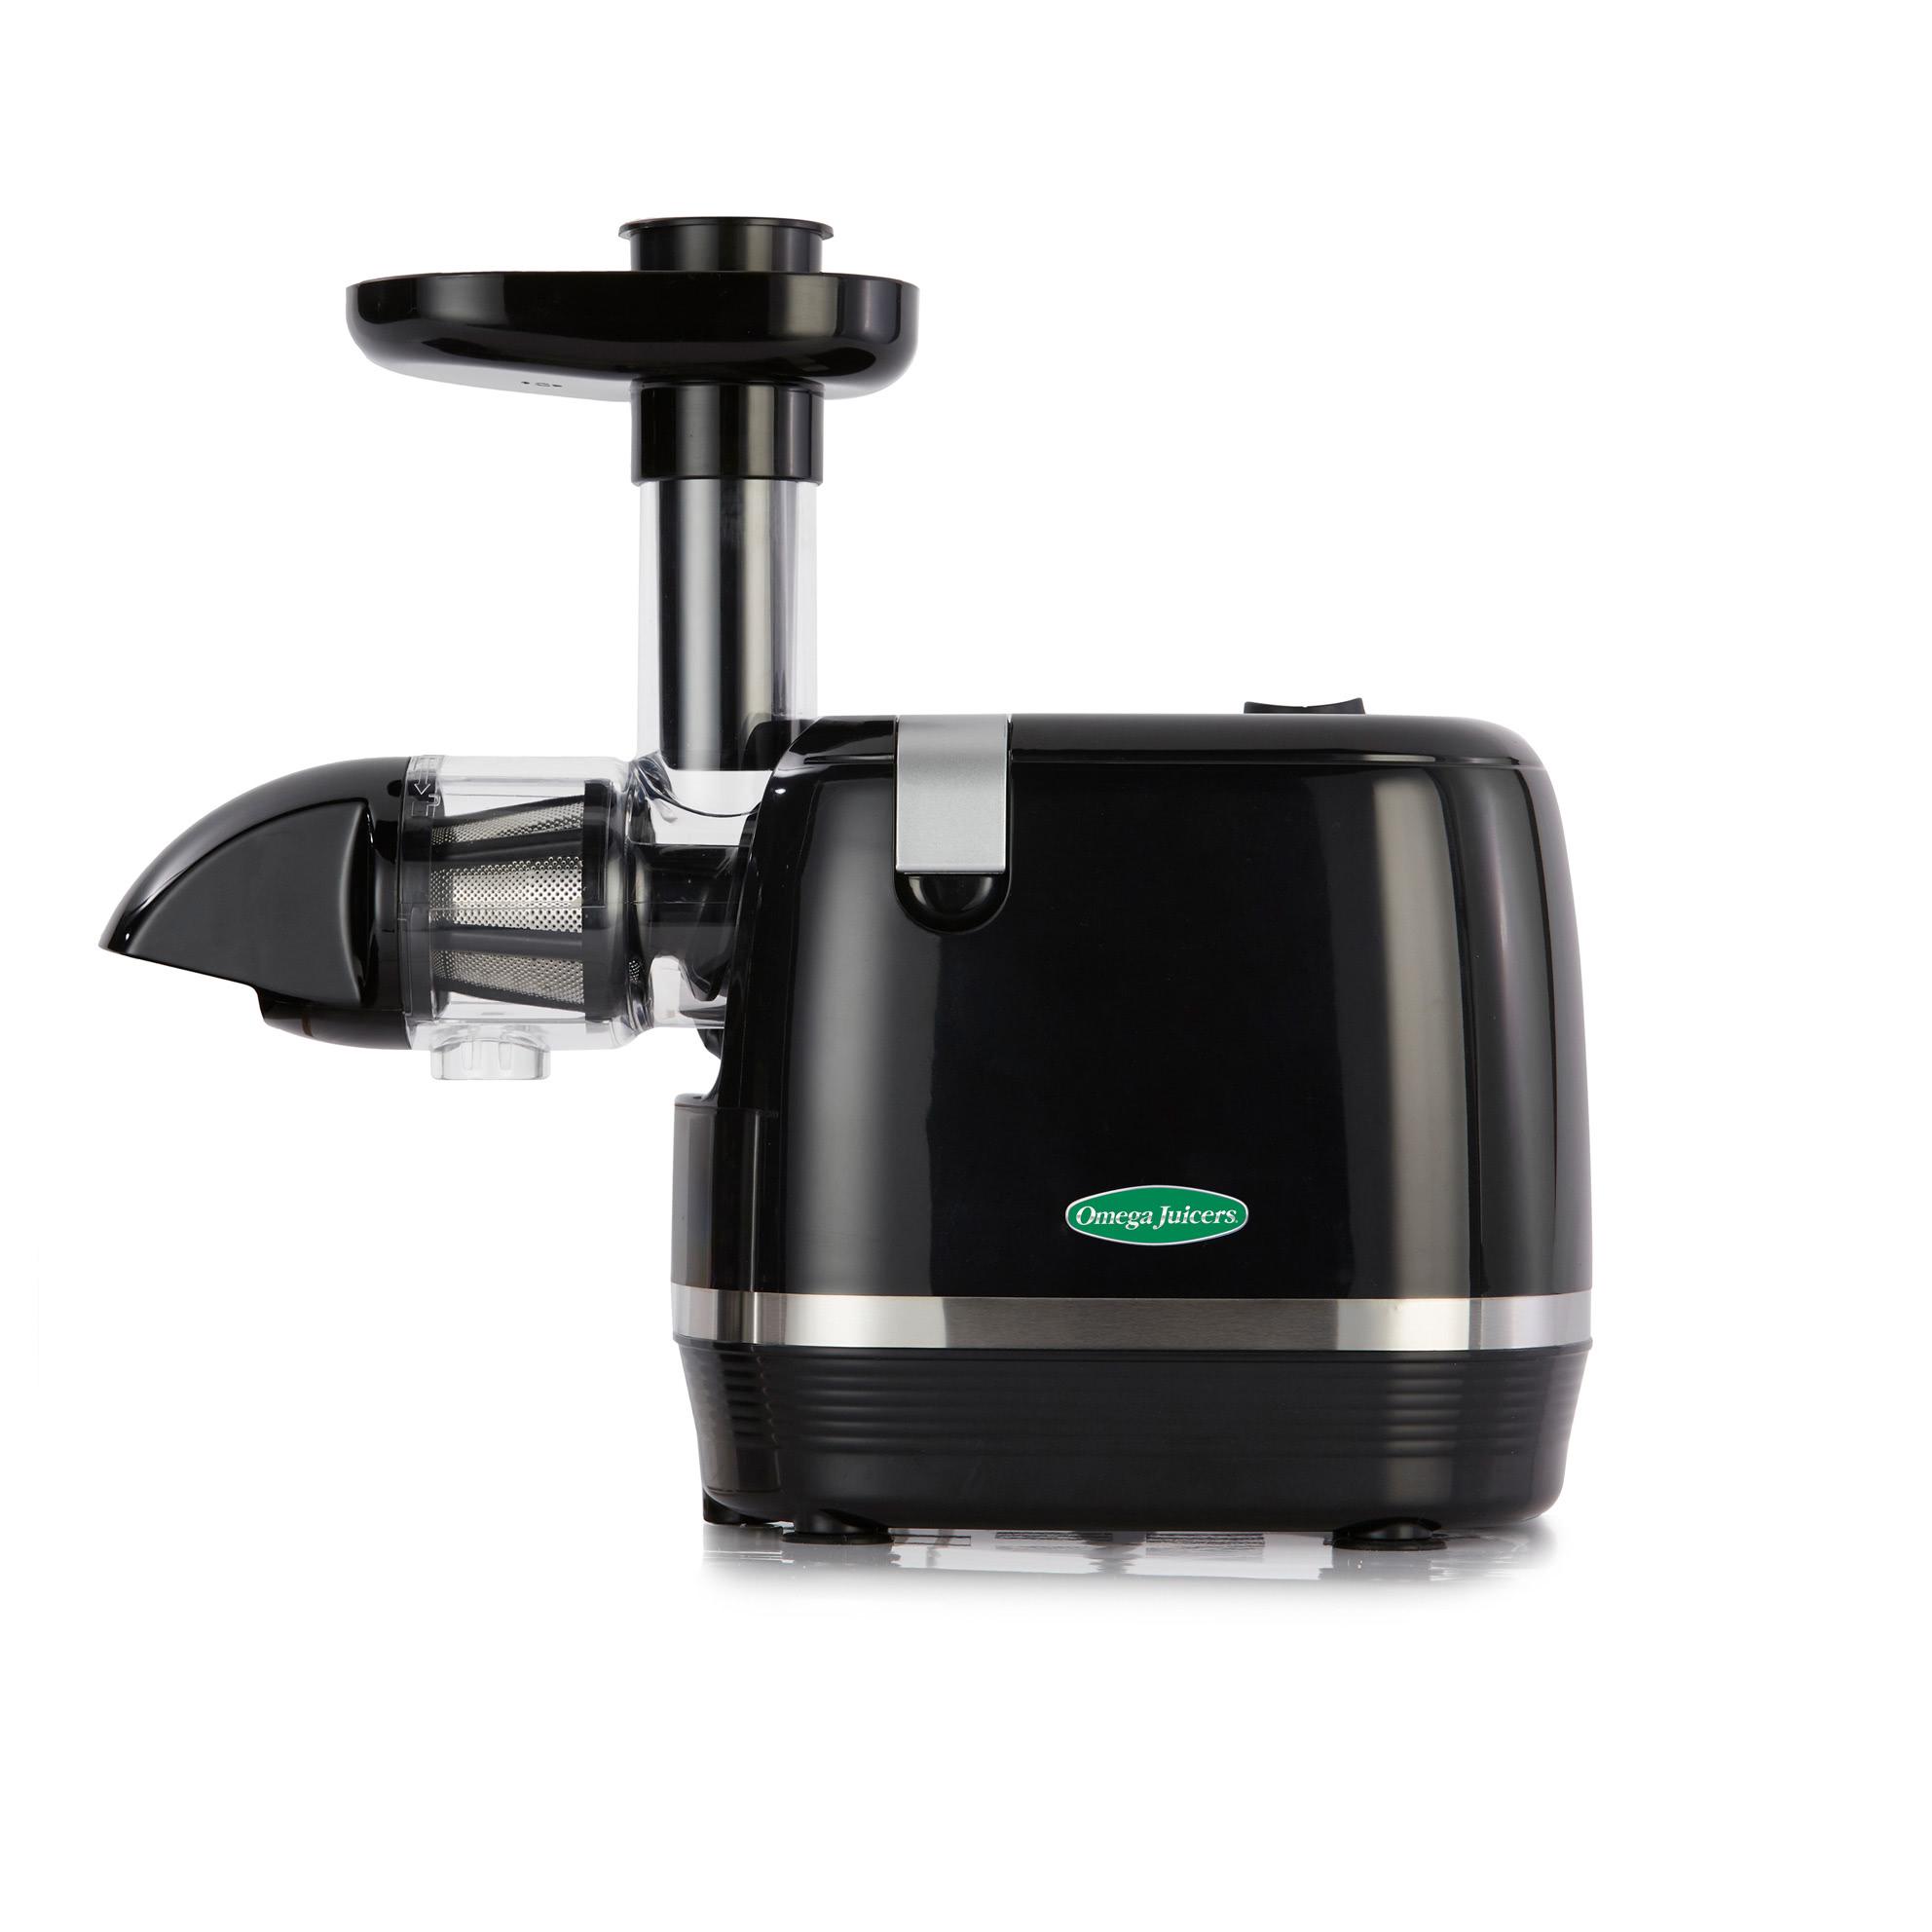 Omega Juicers H3000R-F - the entry-level juicer for freshly squeezed juices